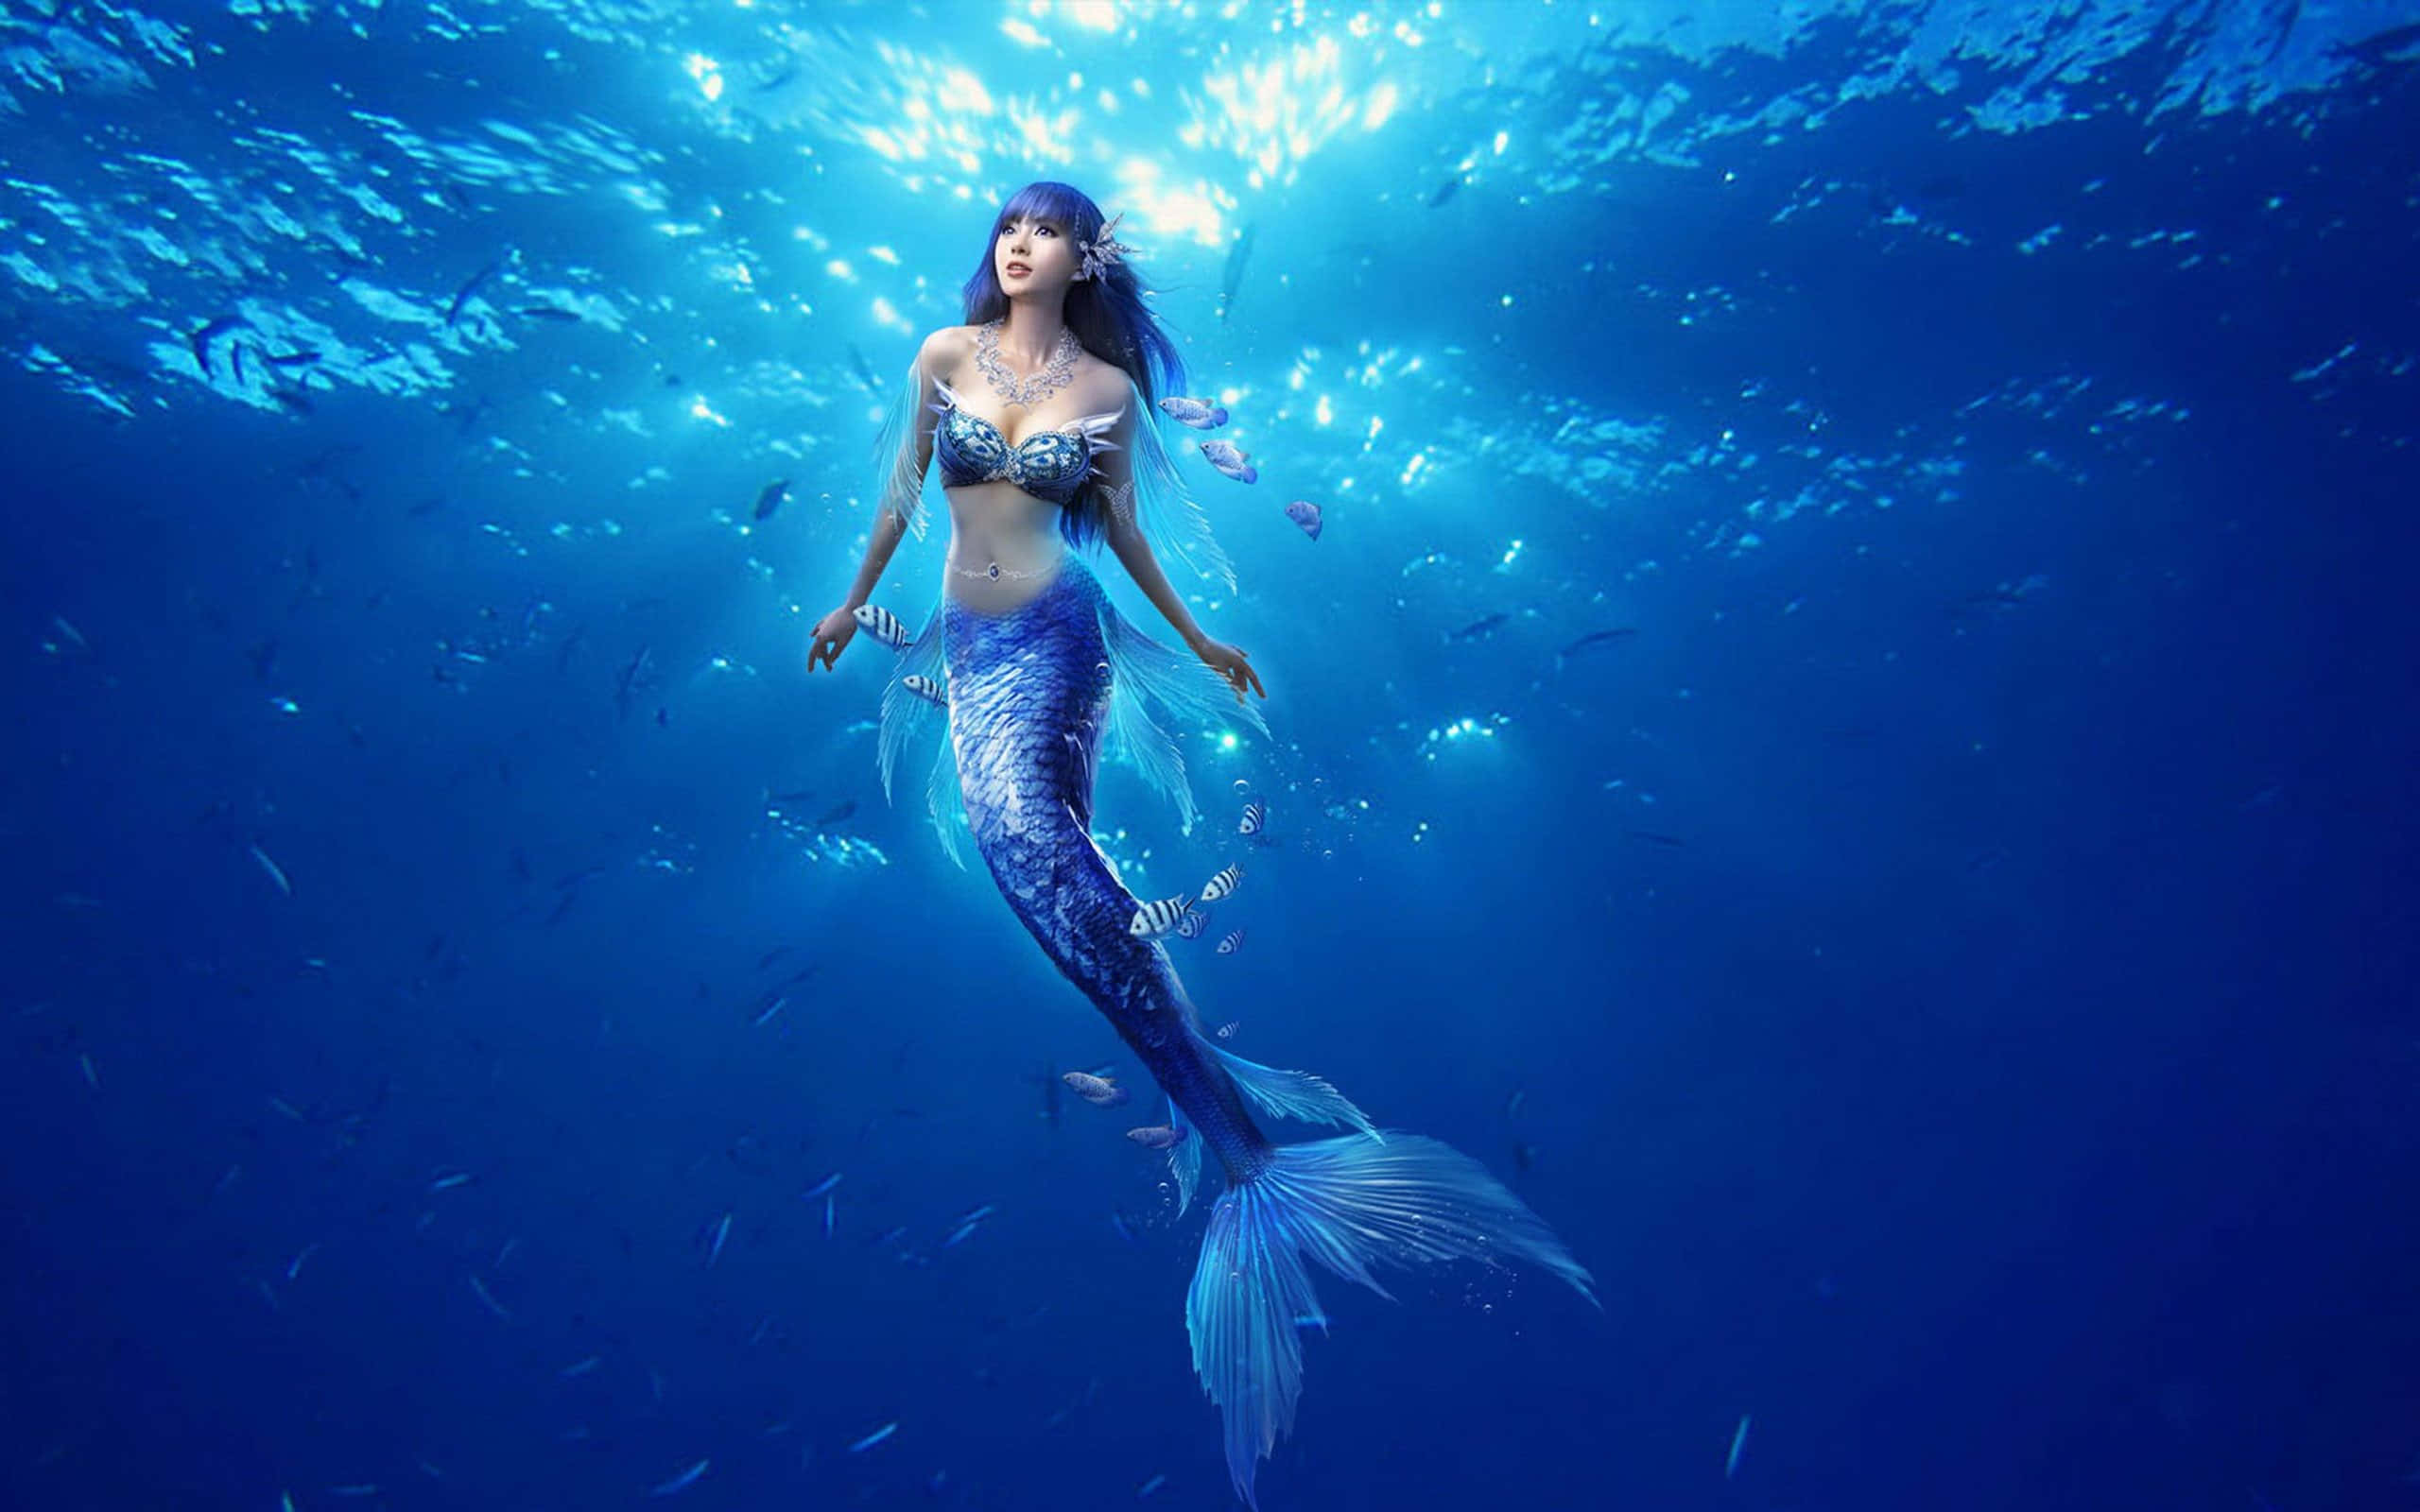 Captivating scenes of a beautiful mermaid in an extraordinary landscape